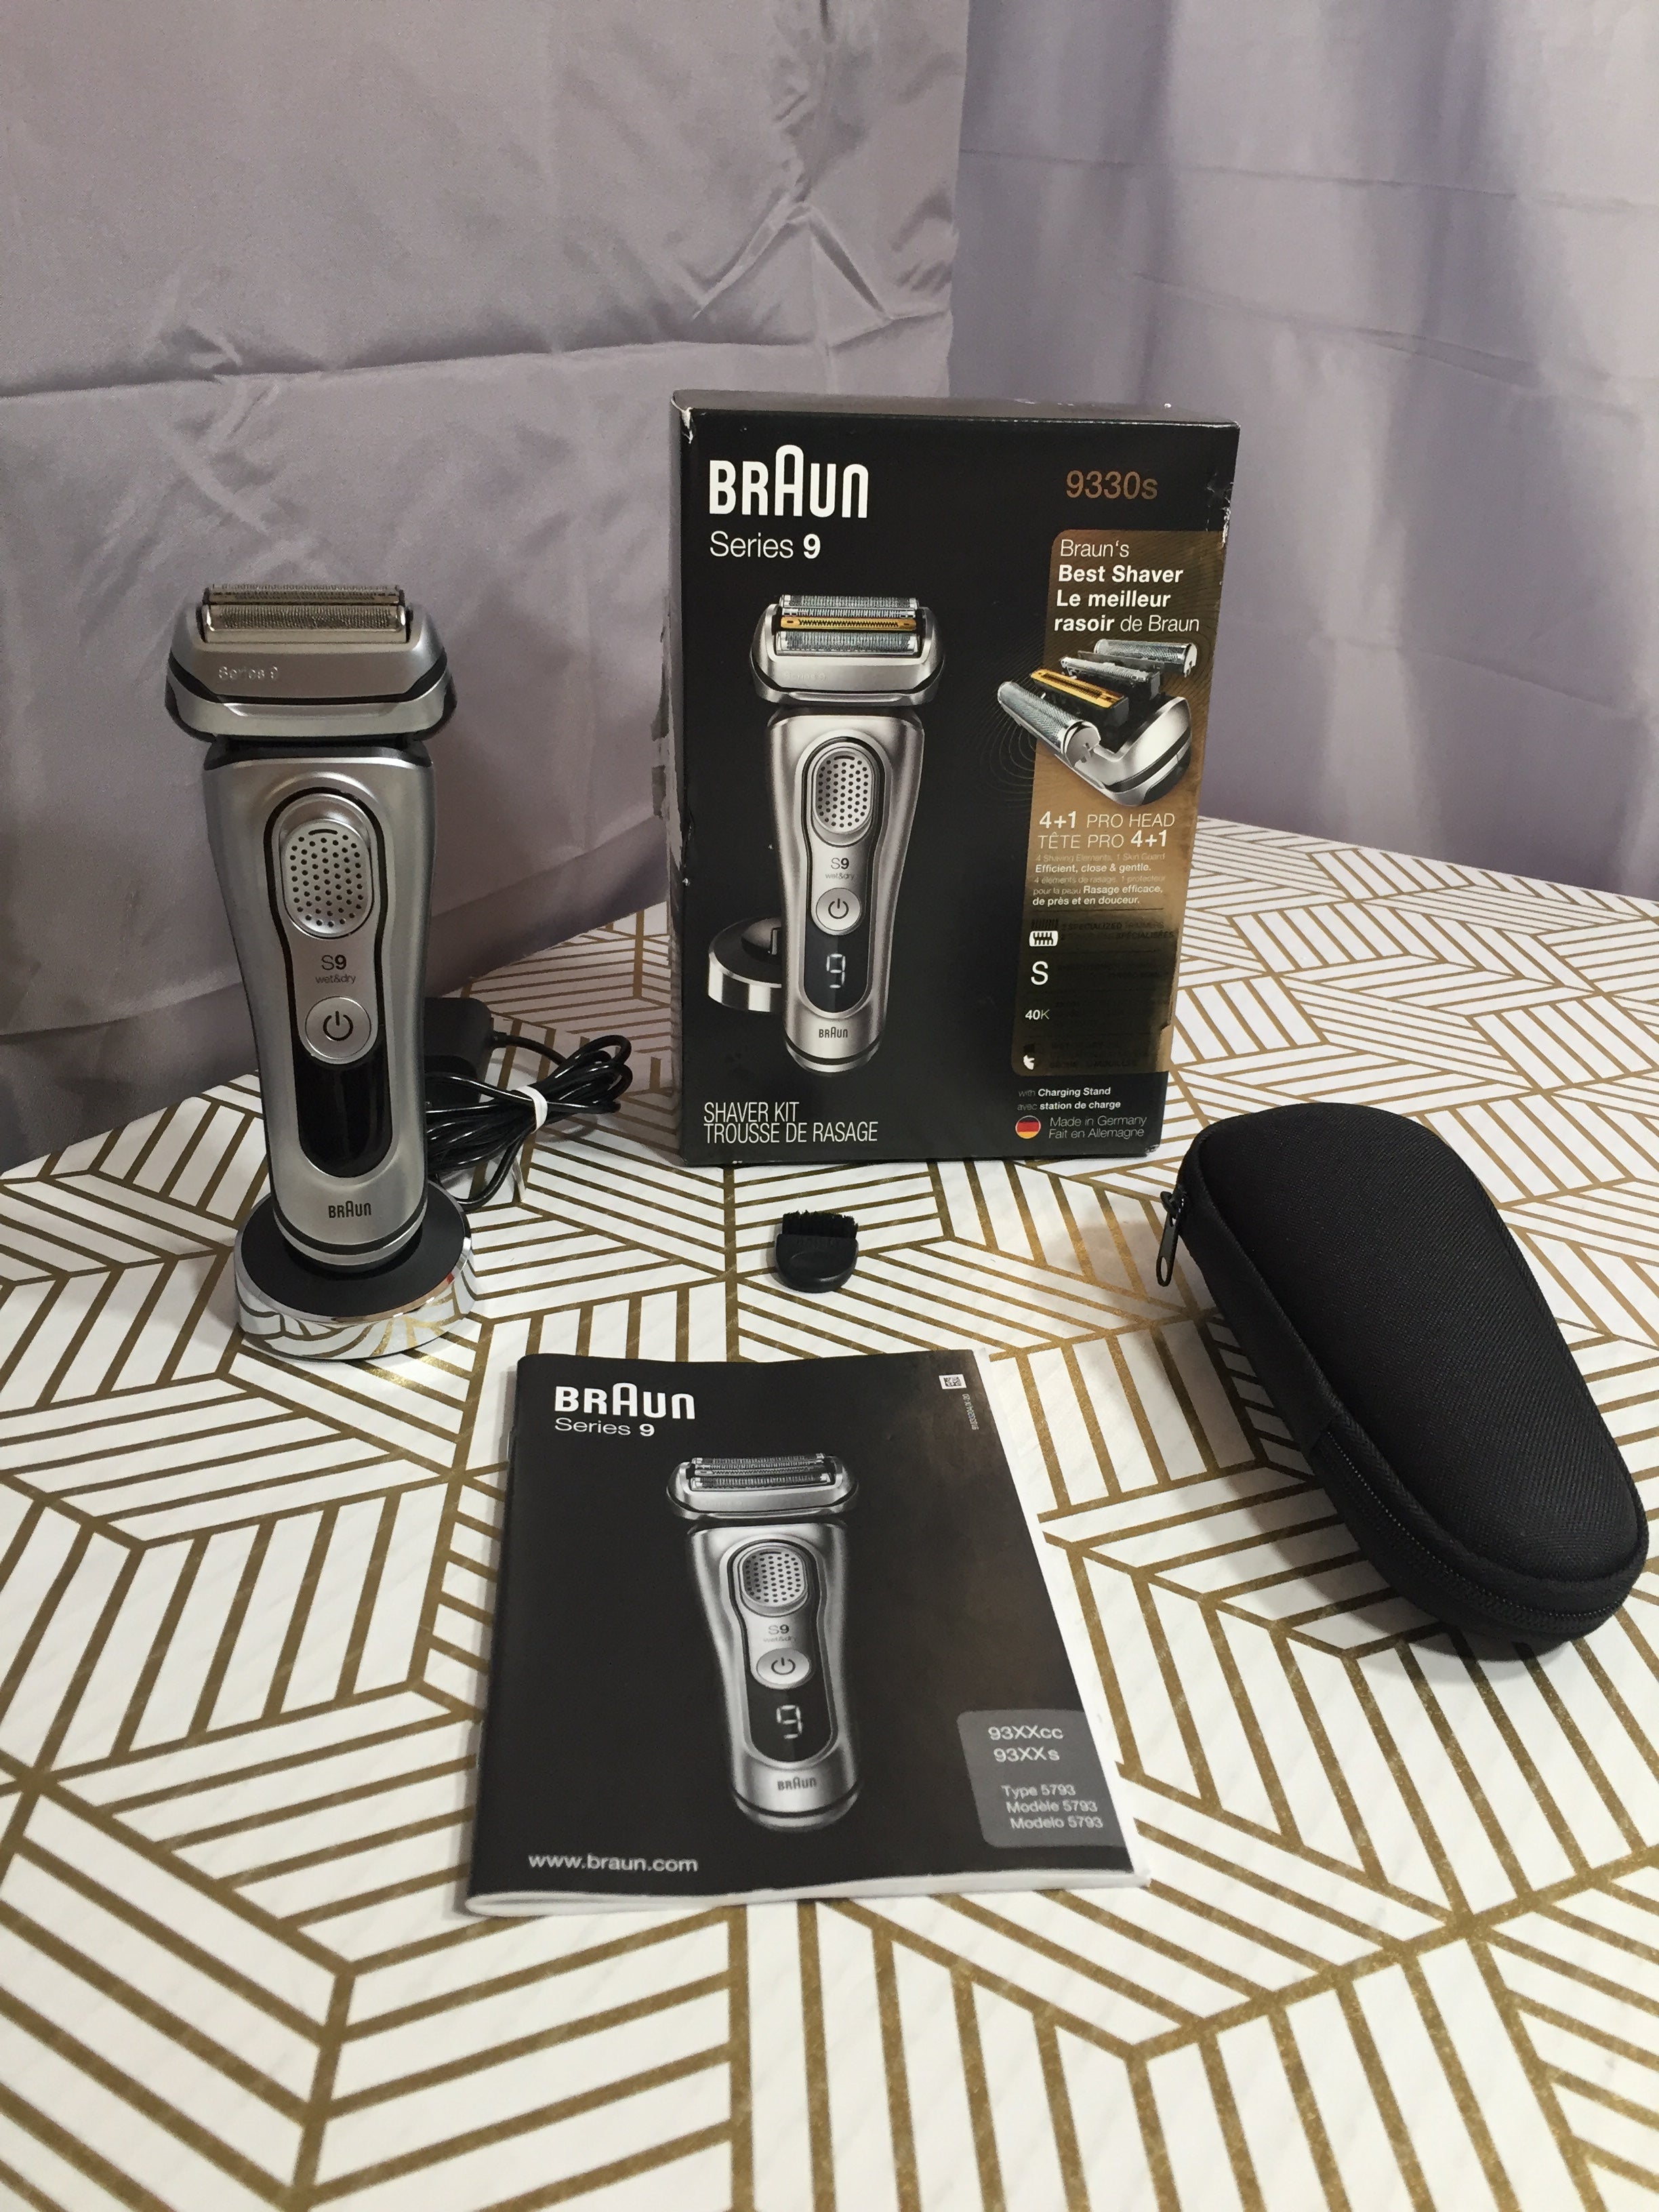 Braun Electric Razor for Men, Waterproof Foil Shaver, Series 9 9330s, Wet & Dry Shave, With Pop-Up Beard Trimmer for Grooming, Leather Travel Case & Charging Stand, Silver (8038525141230)